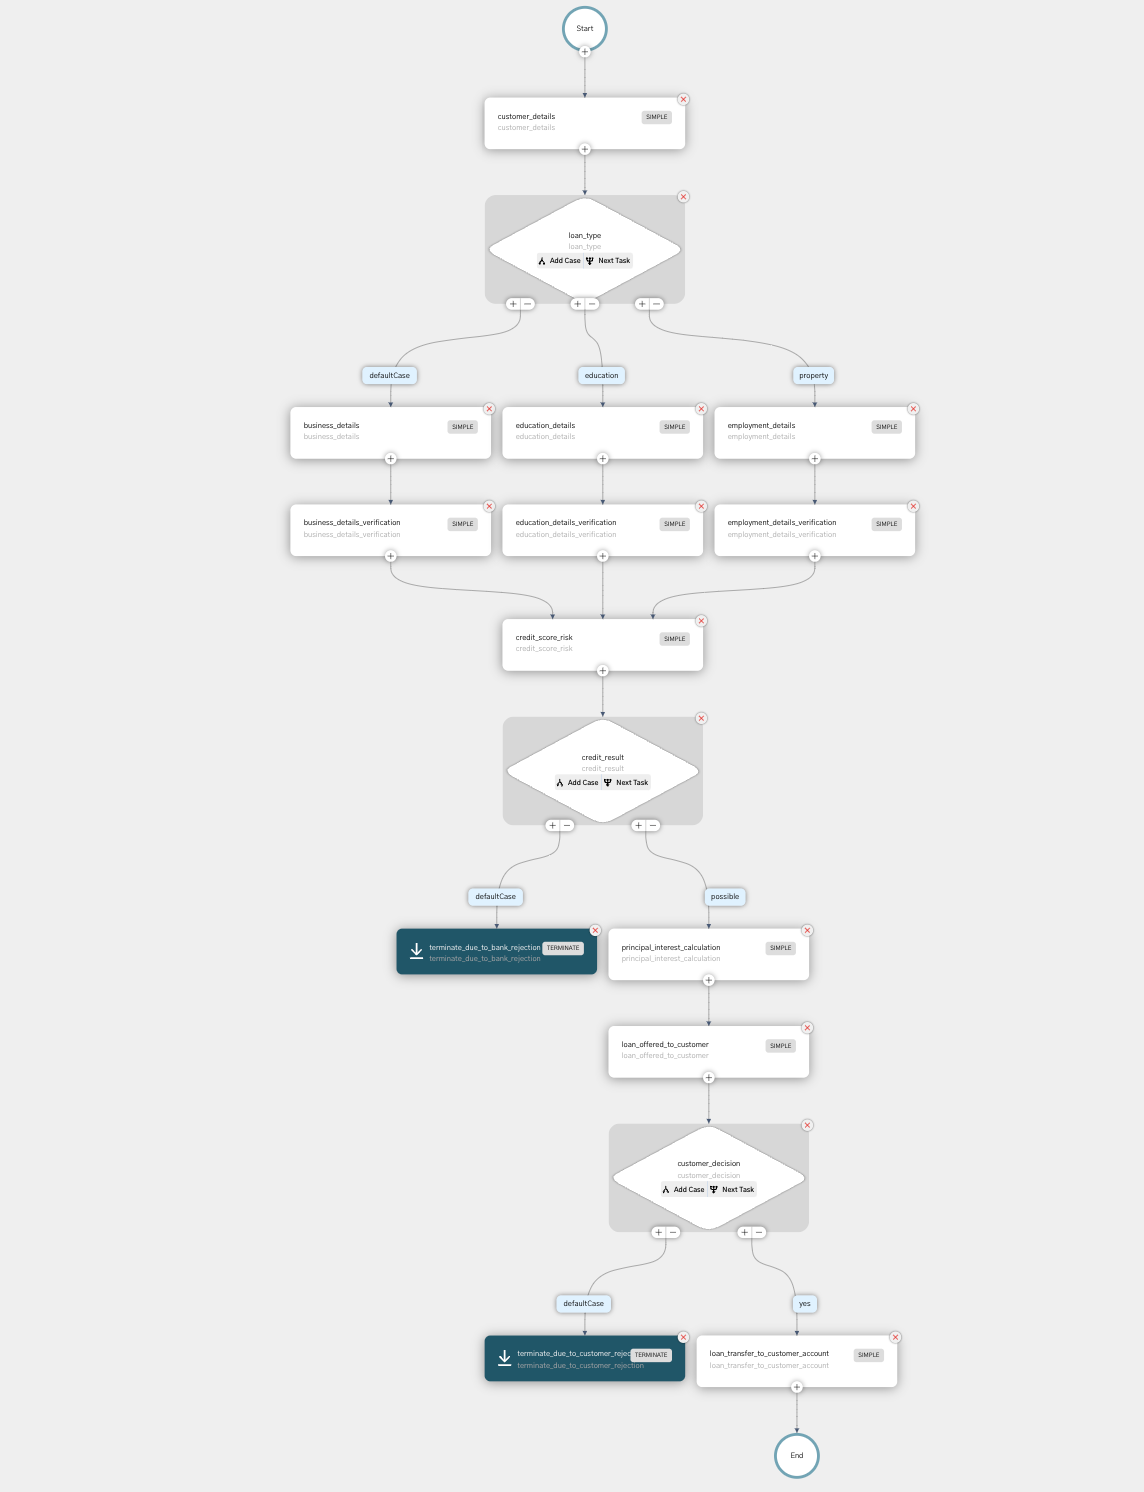 Sample workflow created for loan origination using Conductor